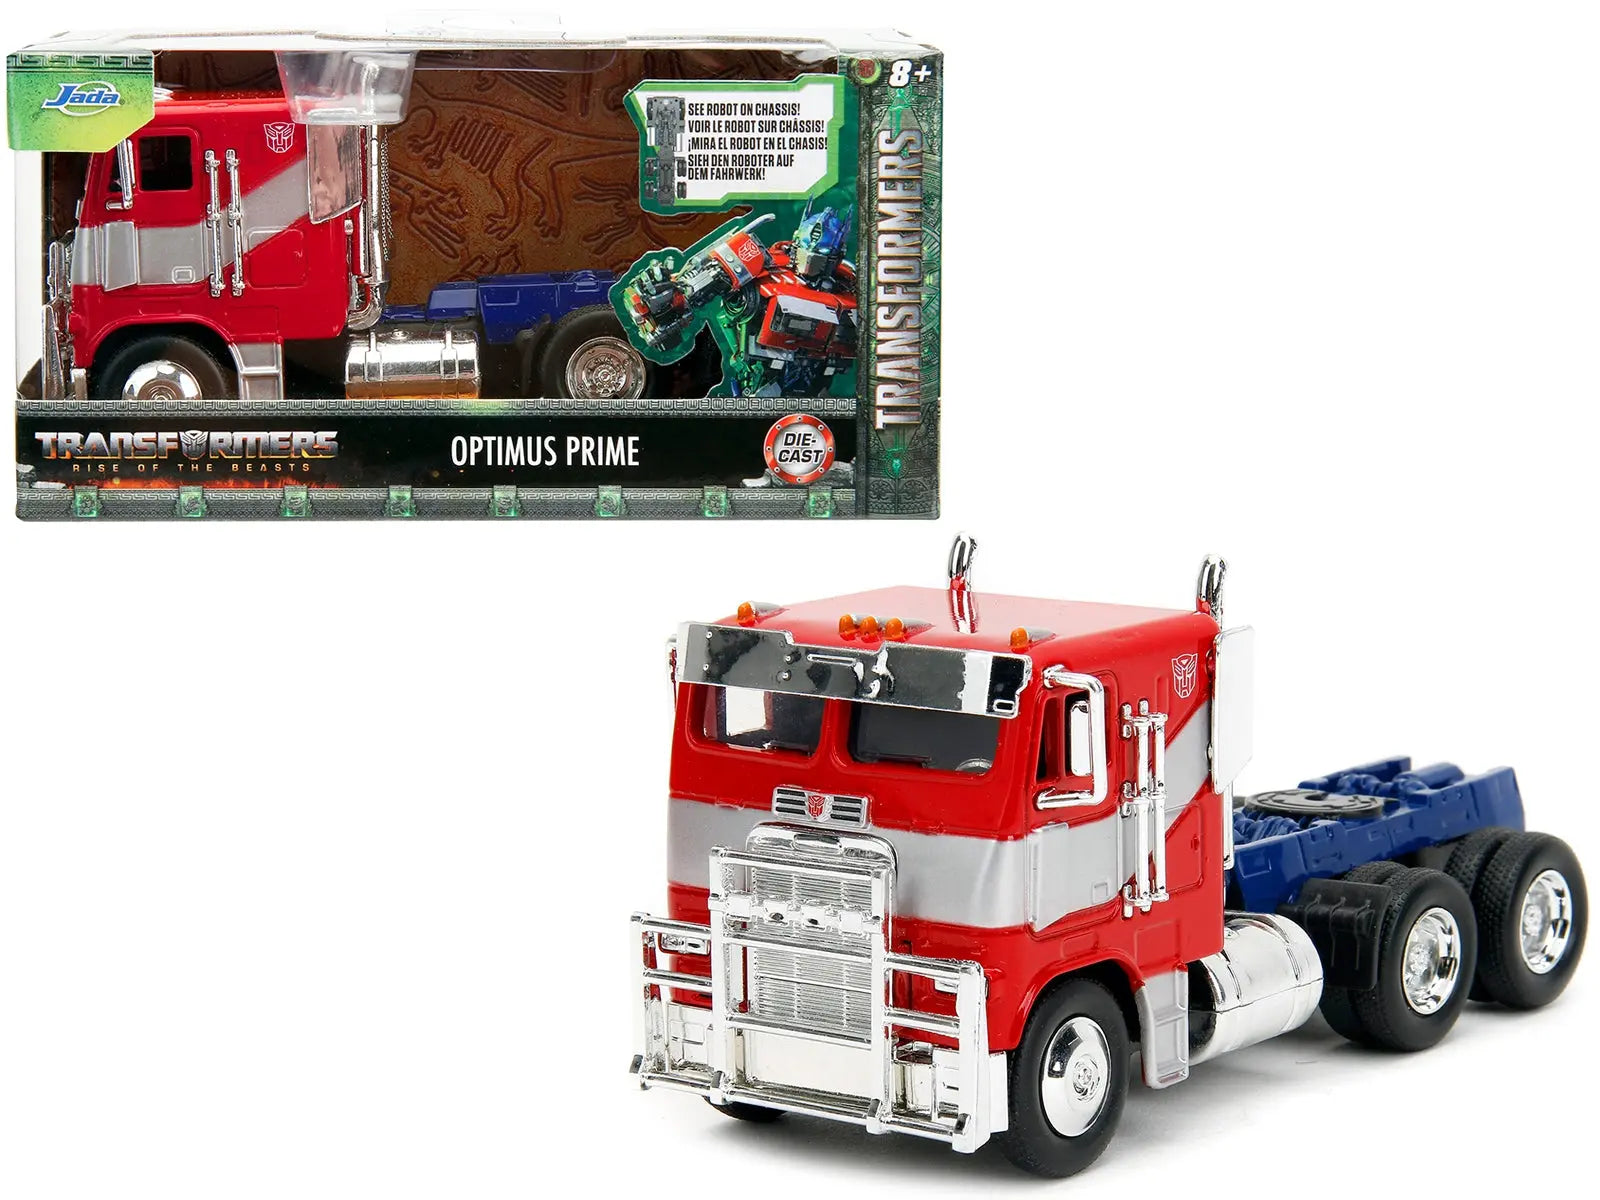 Optimus Prime Tractor Truck Red and Blue with Silver Stripes "Transformers: Rise of the Beasts" (2023) Movie "Hollywood Rides" Series 1/32 Diecast Model Car by Jada Jada